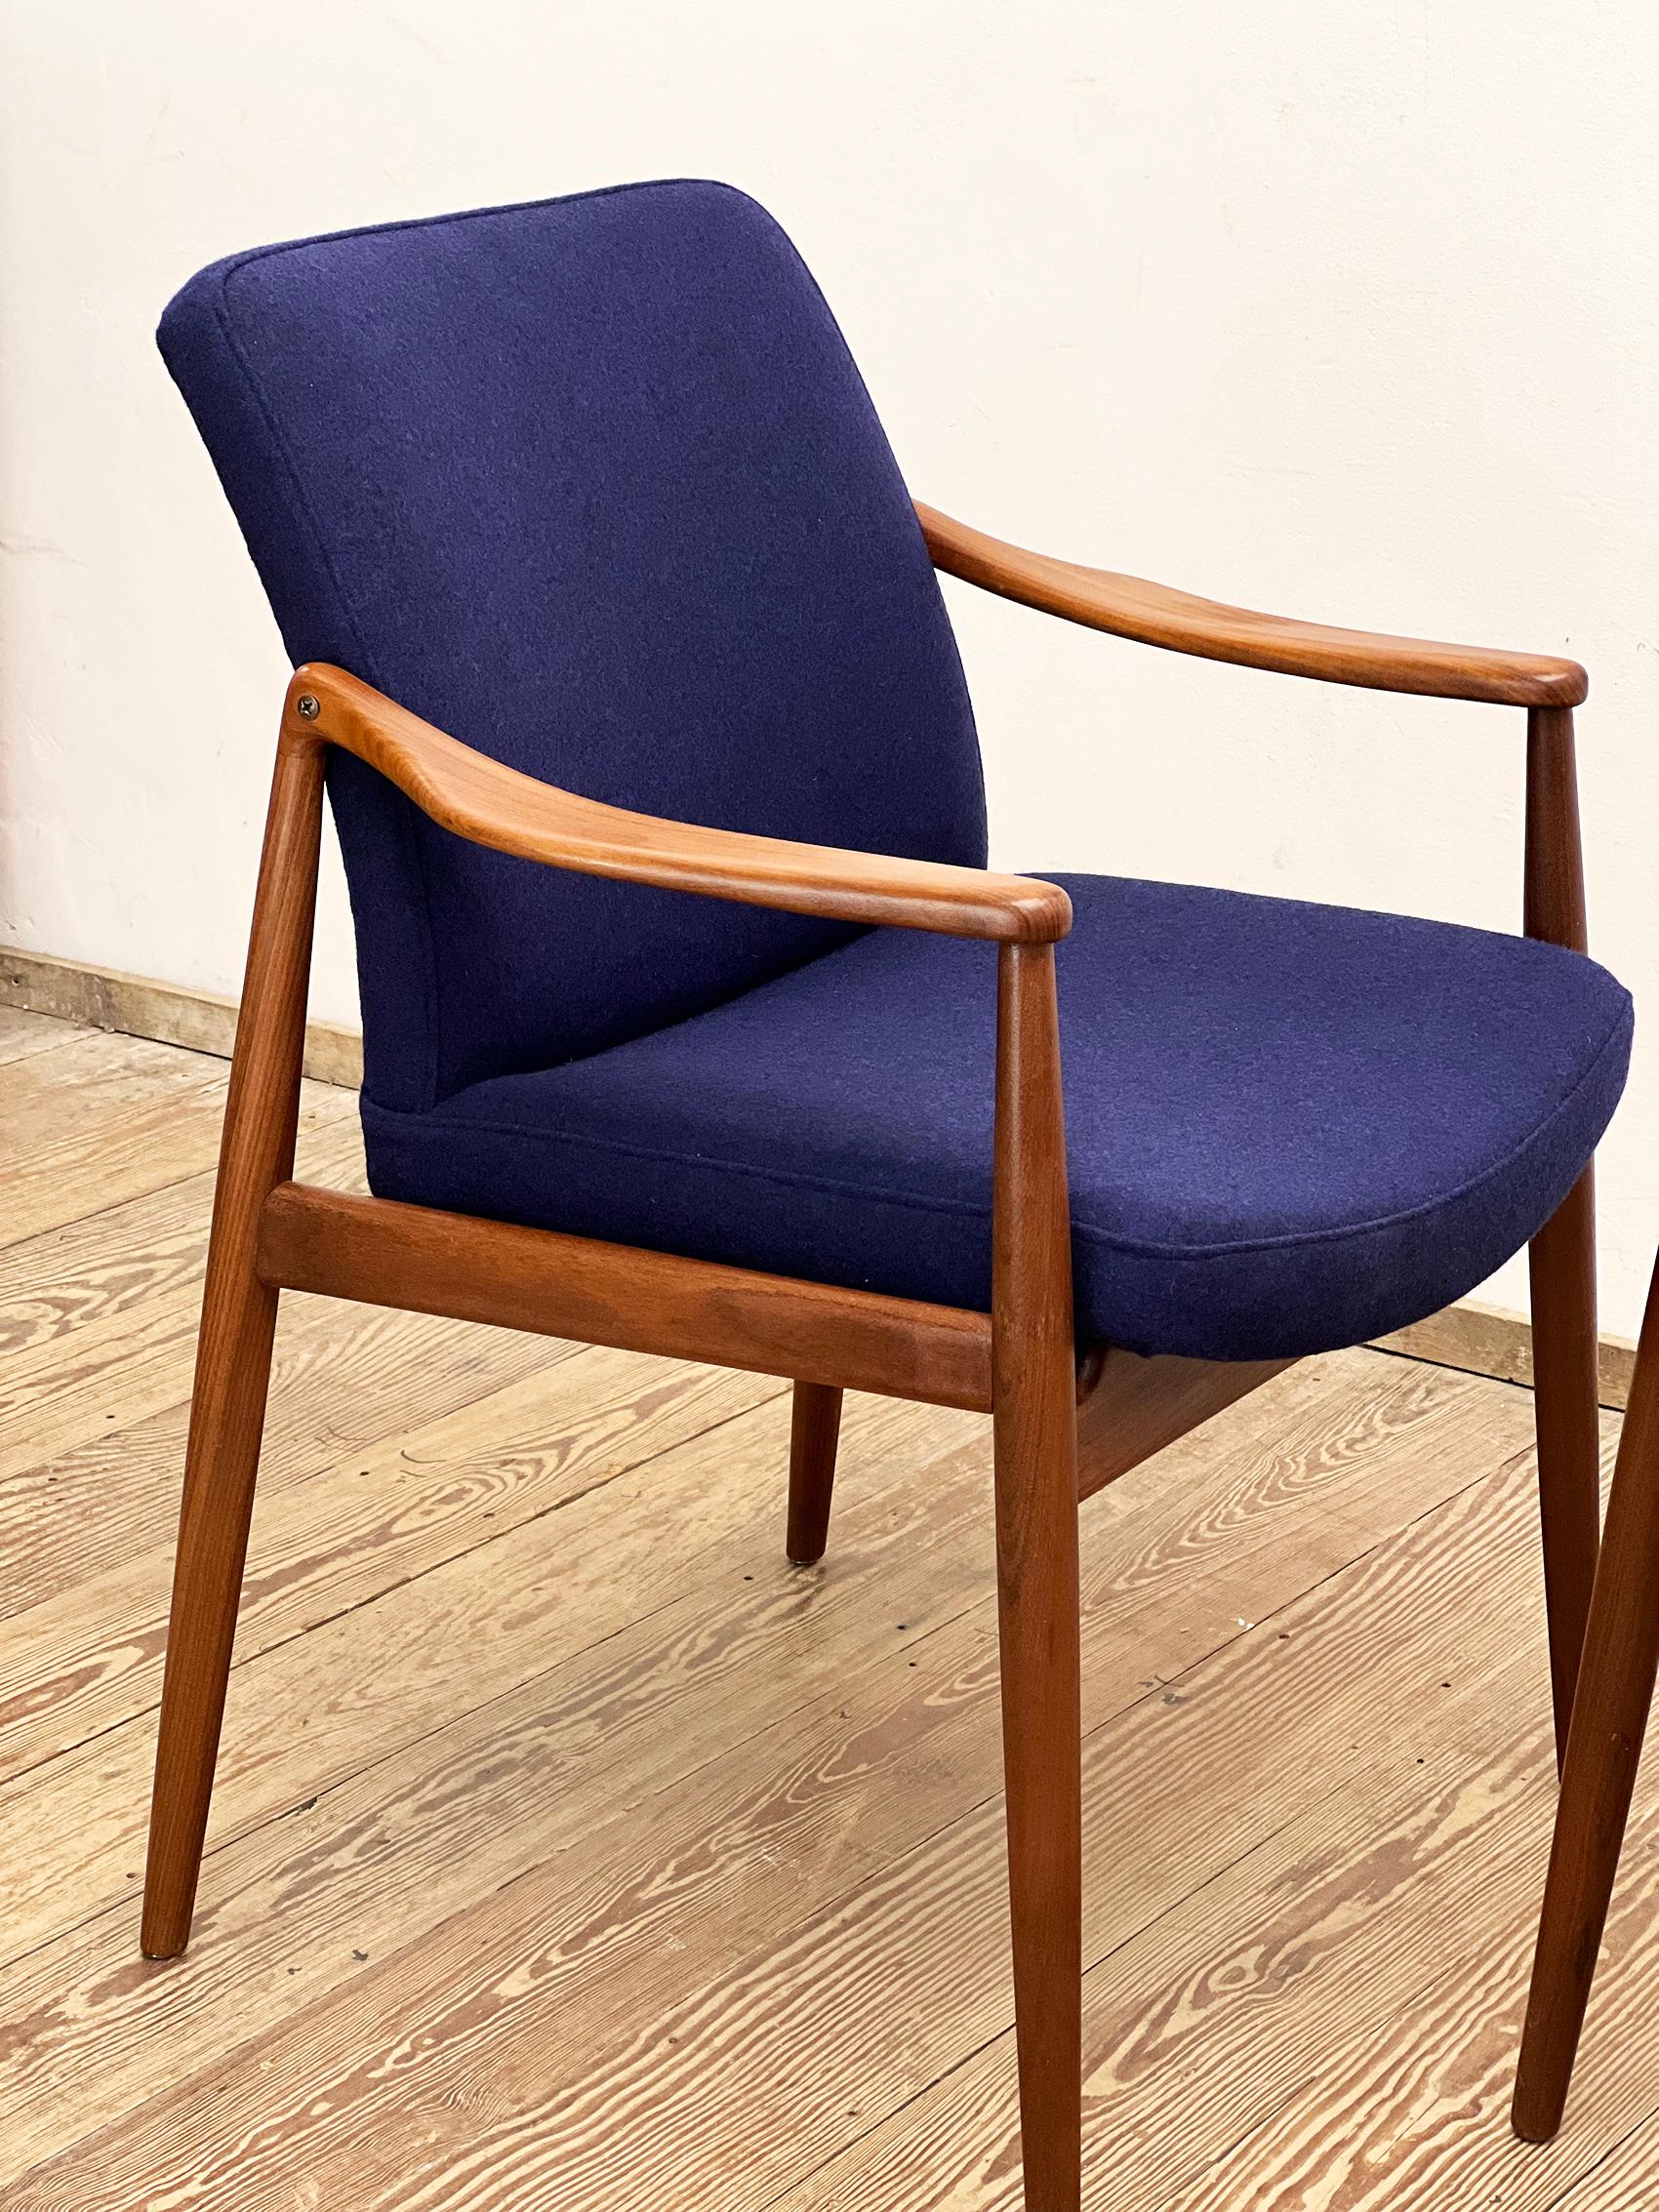 Two Mid-Century Modern Teak Armchairs by Hartmut Lohmeyer for Wilkhahn, 1950s For Sale 3